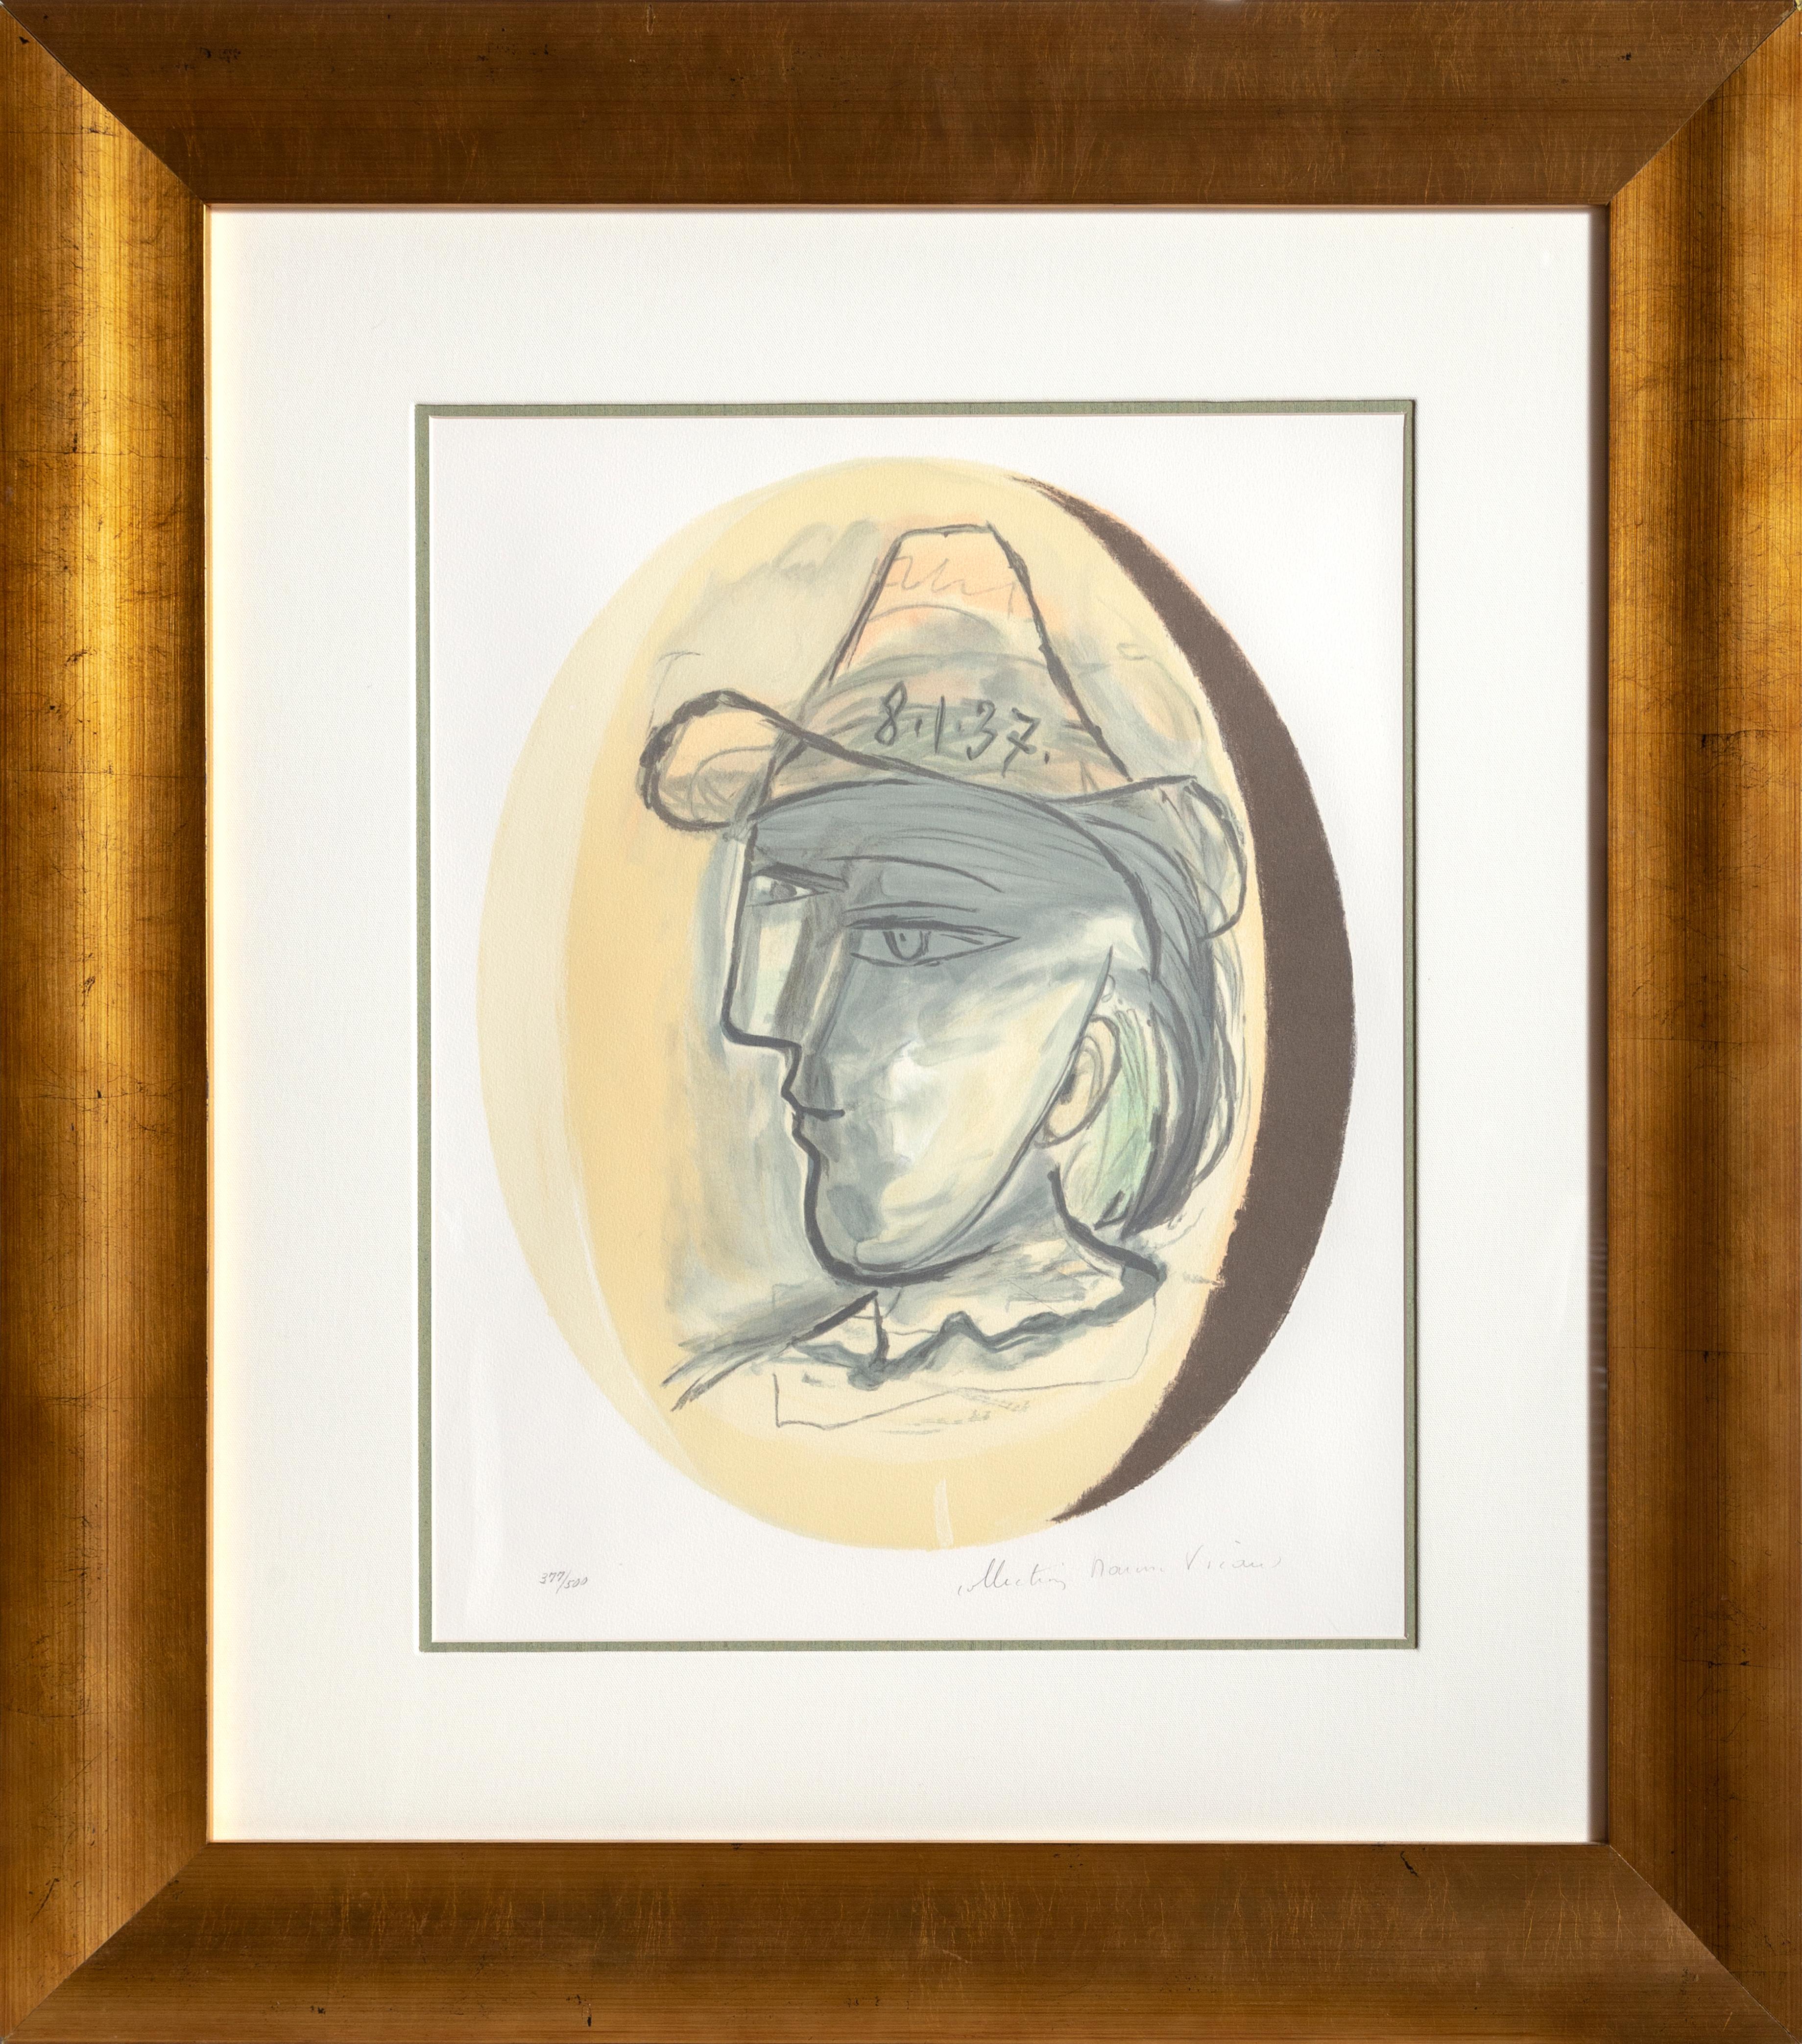 Tete, Framed Cubist Lithograph by Pablo Picasso